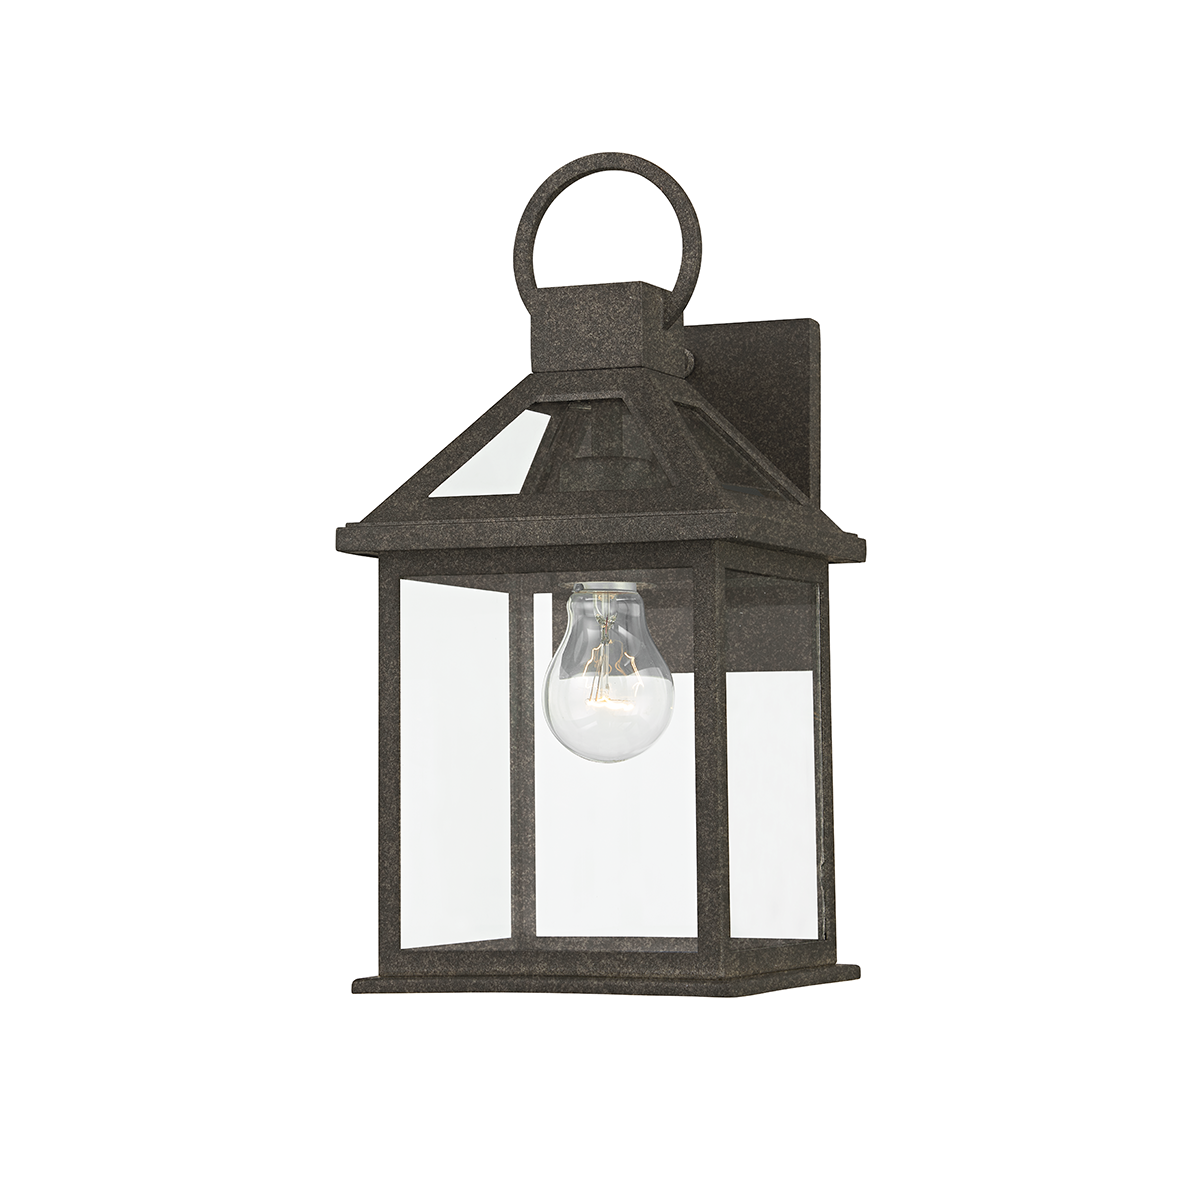 Troy Lighting 1 LIGHT SMALL EXTERIOR WALL SCONCE B2741 Outdoor l Wall Troy Lighting FRENCH IRON  